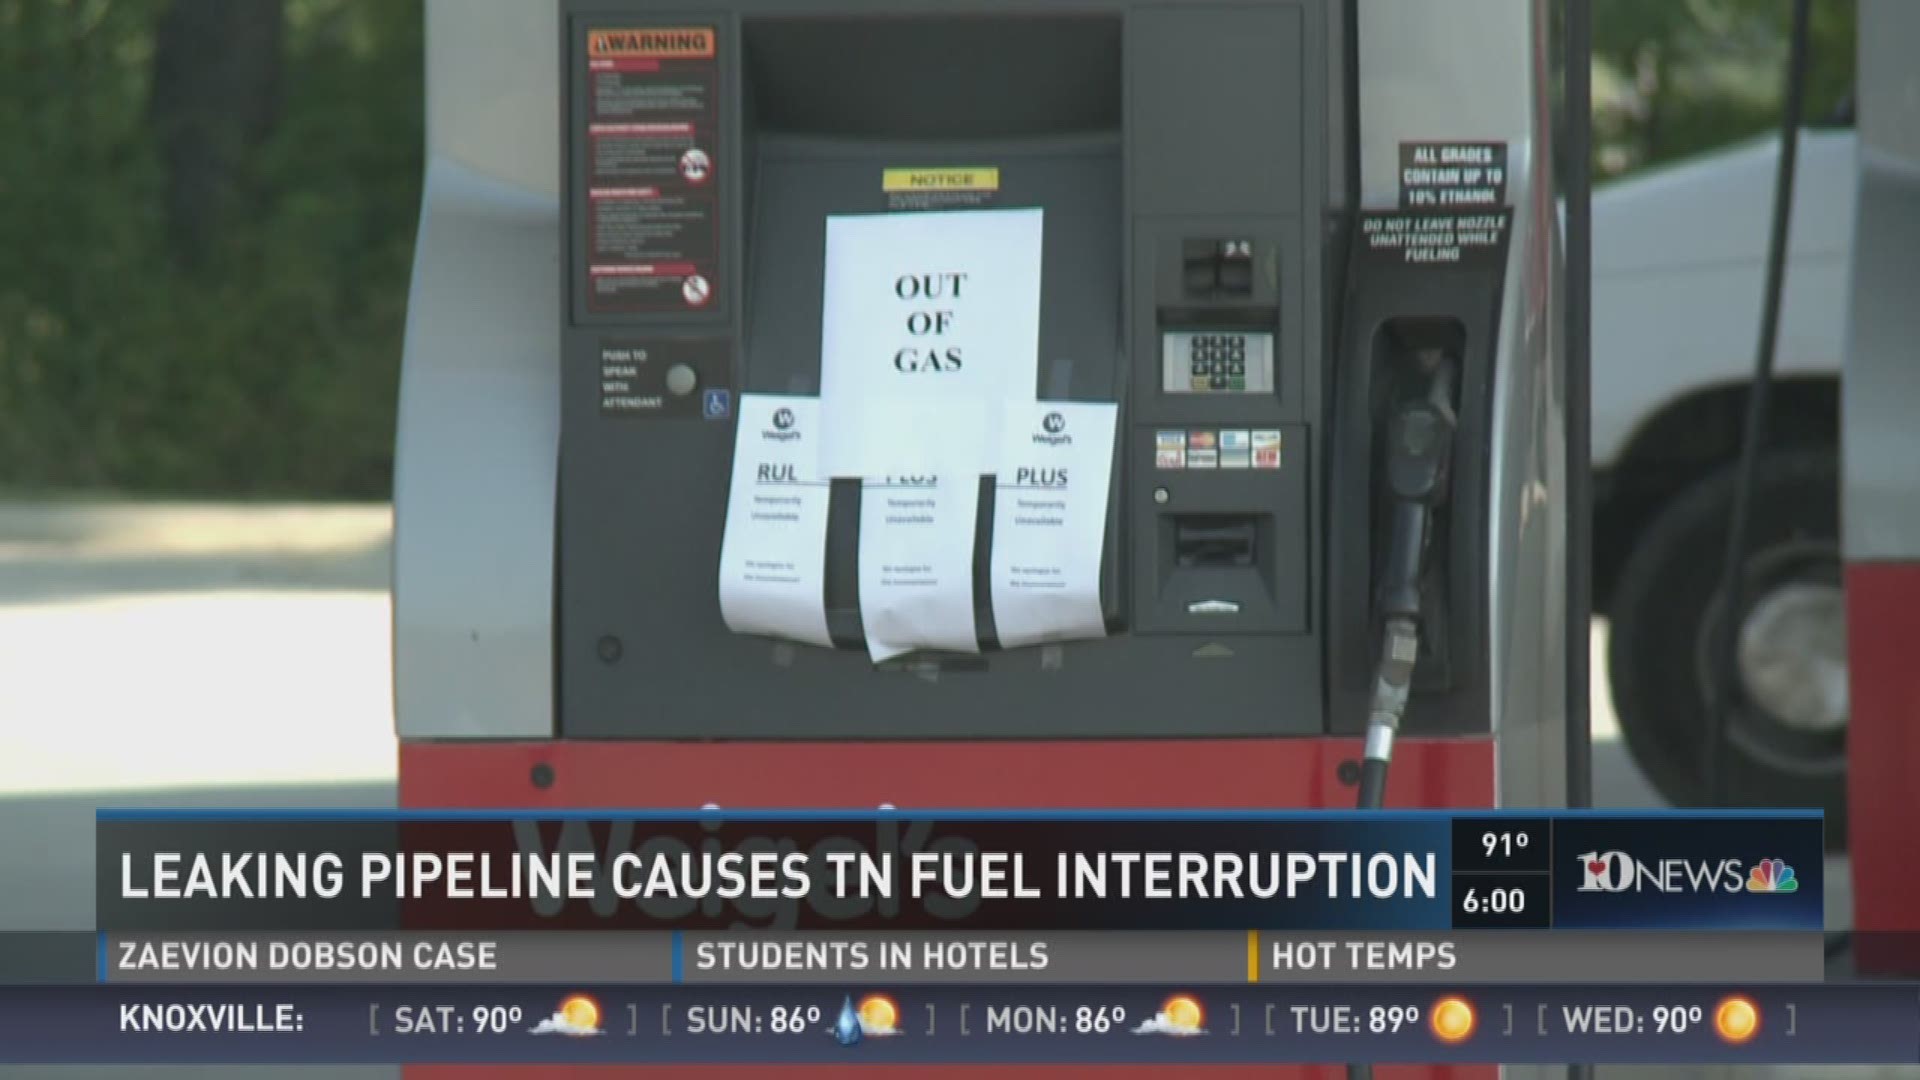 Sept. 16, 2016: Tennessee drivers could pay more for gas in the next few days after a leaking pipeline was shut down in Alabama.